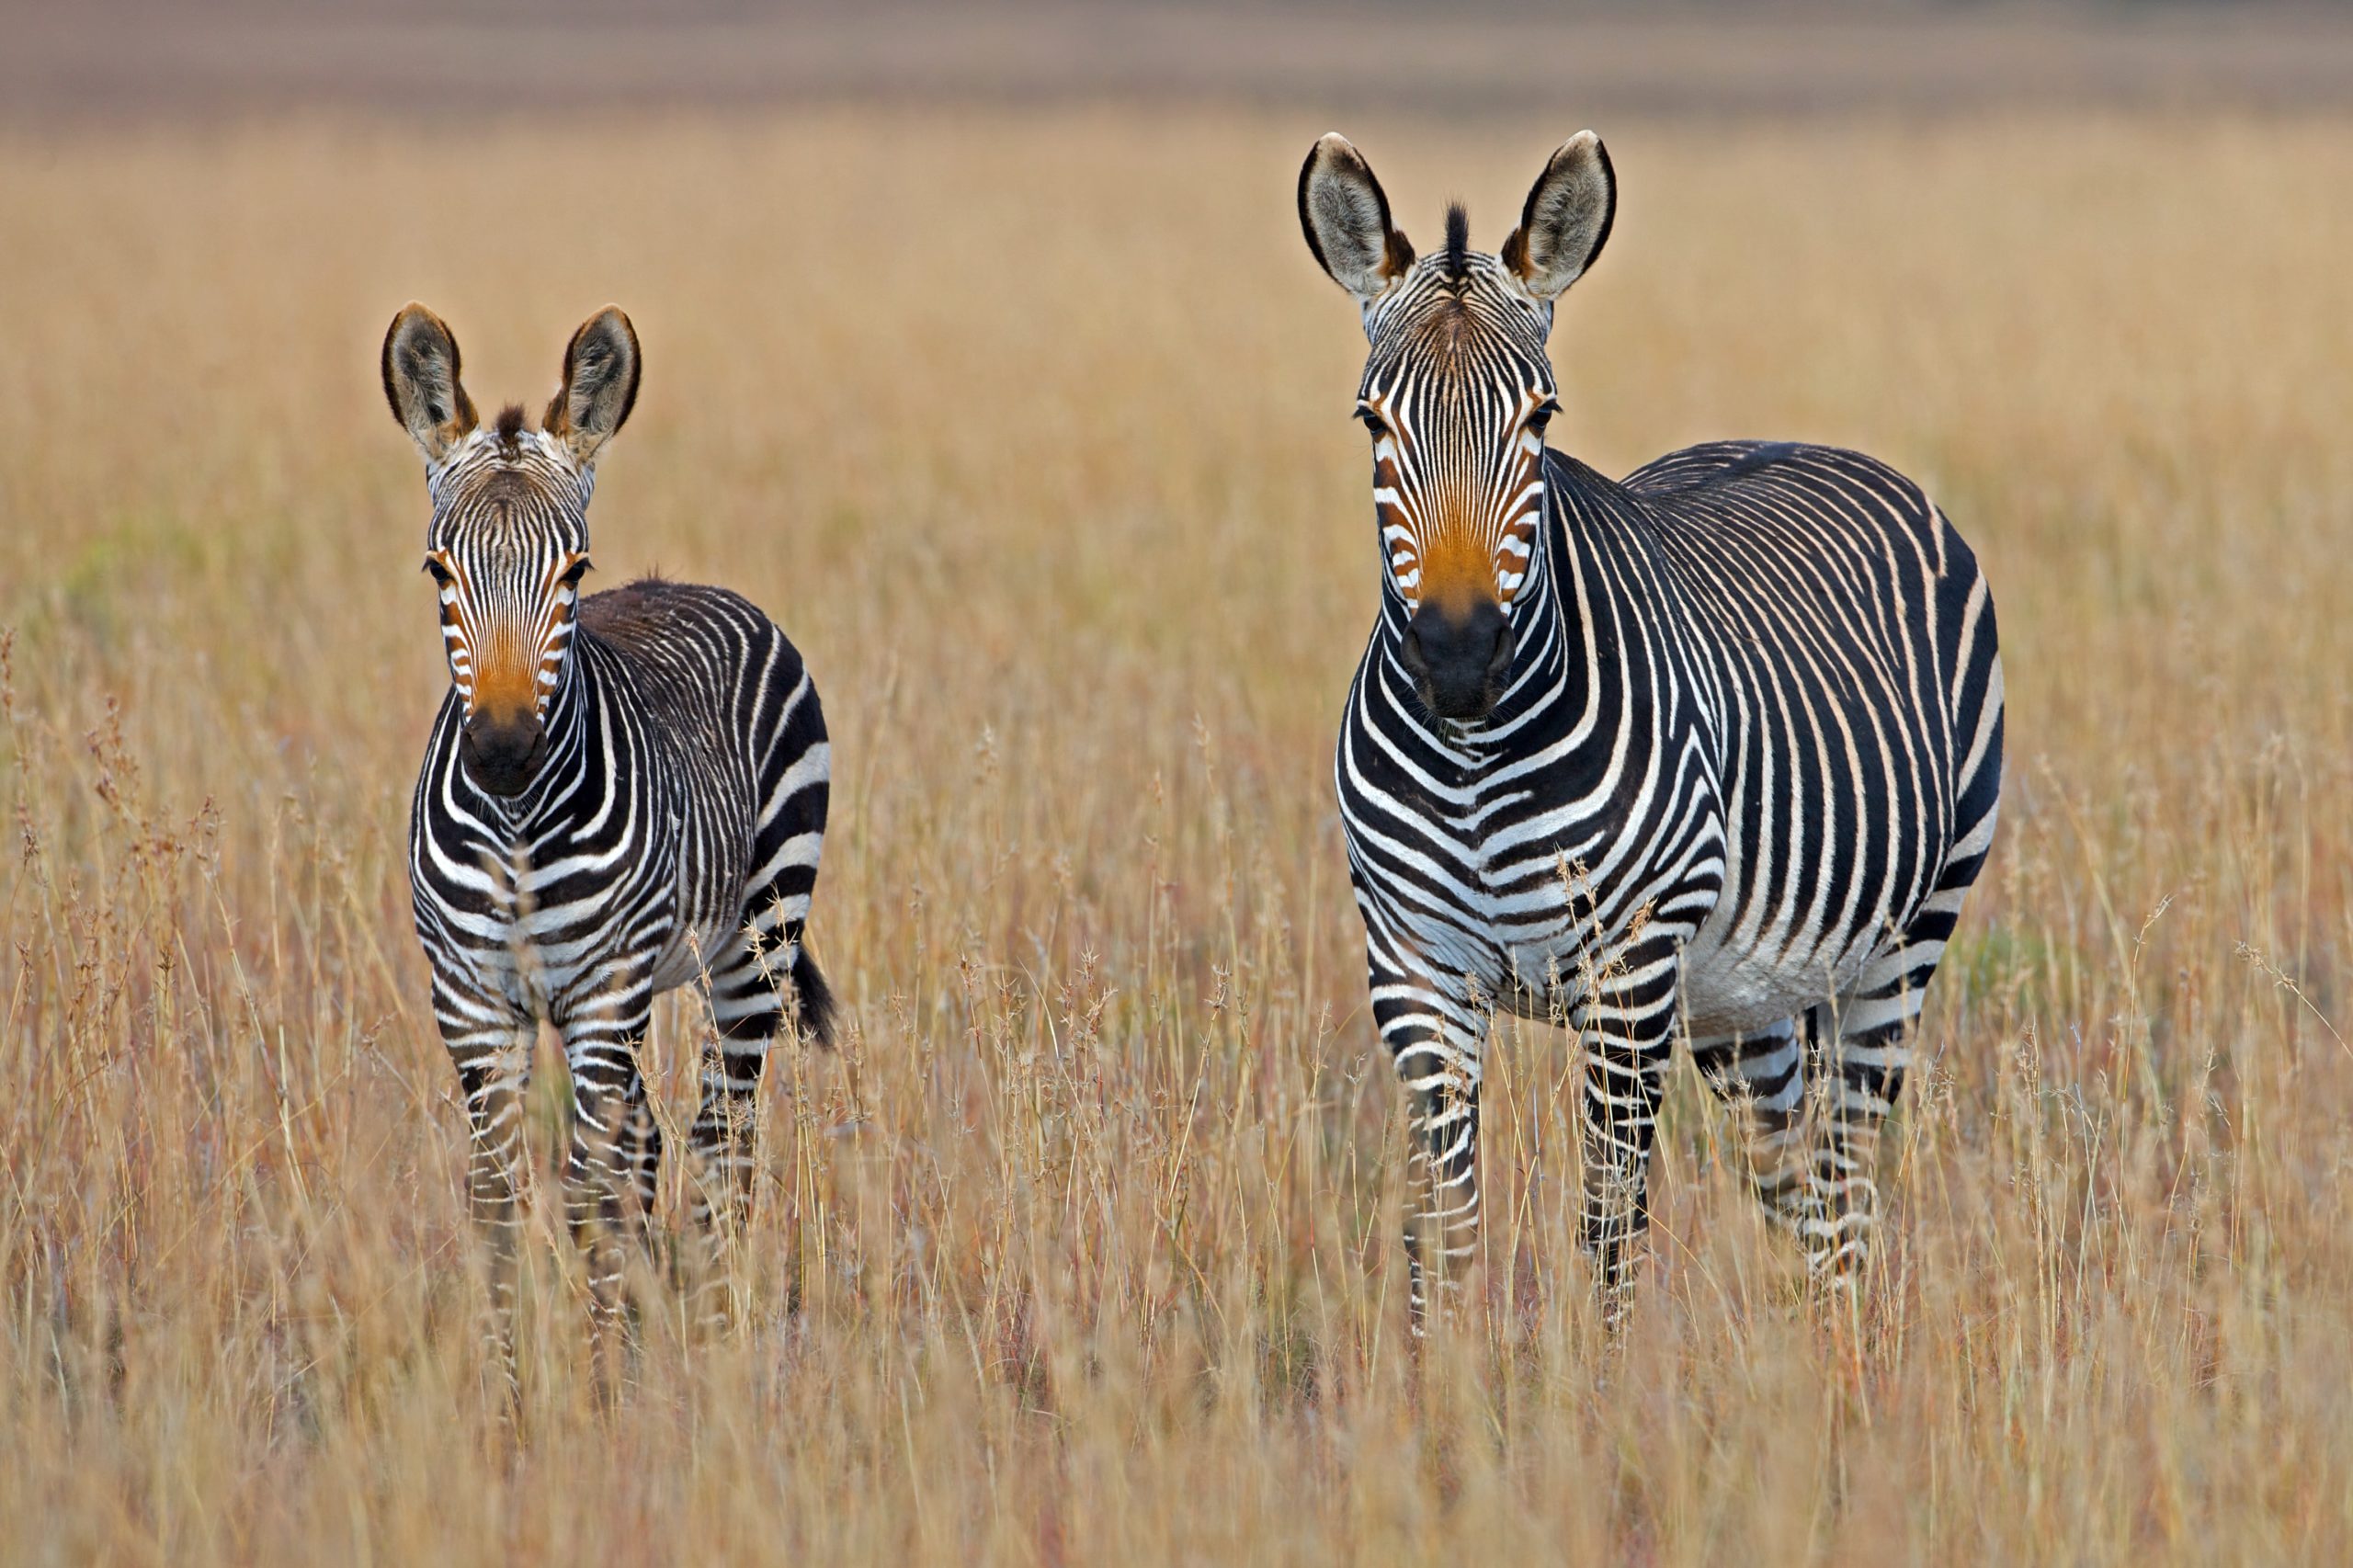 Two zebras stand in dry grass in South Africa